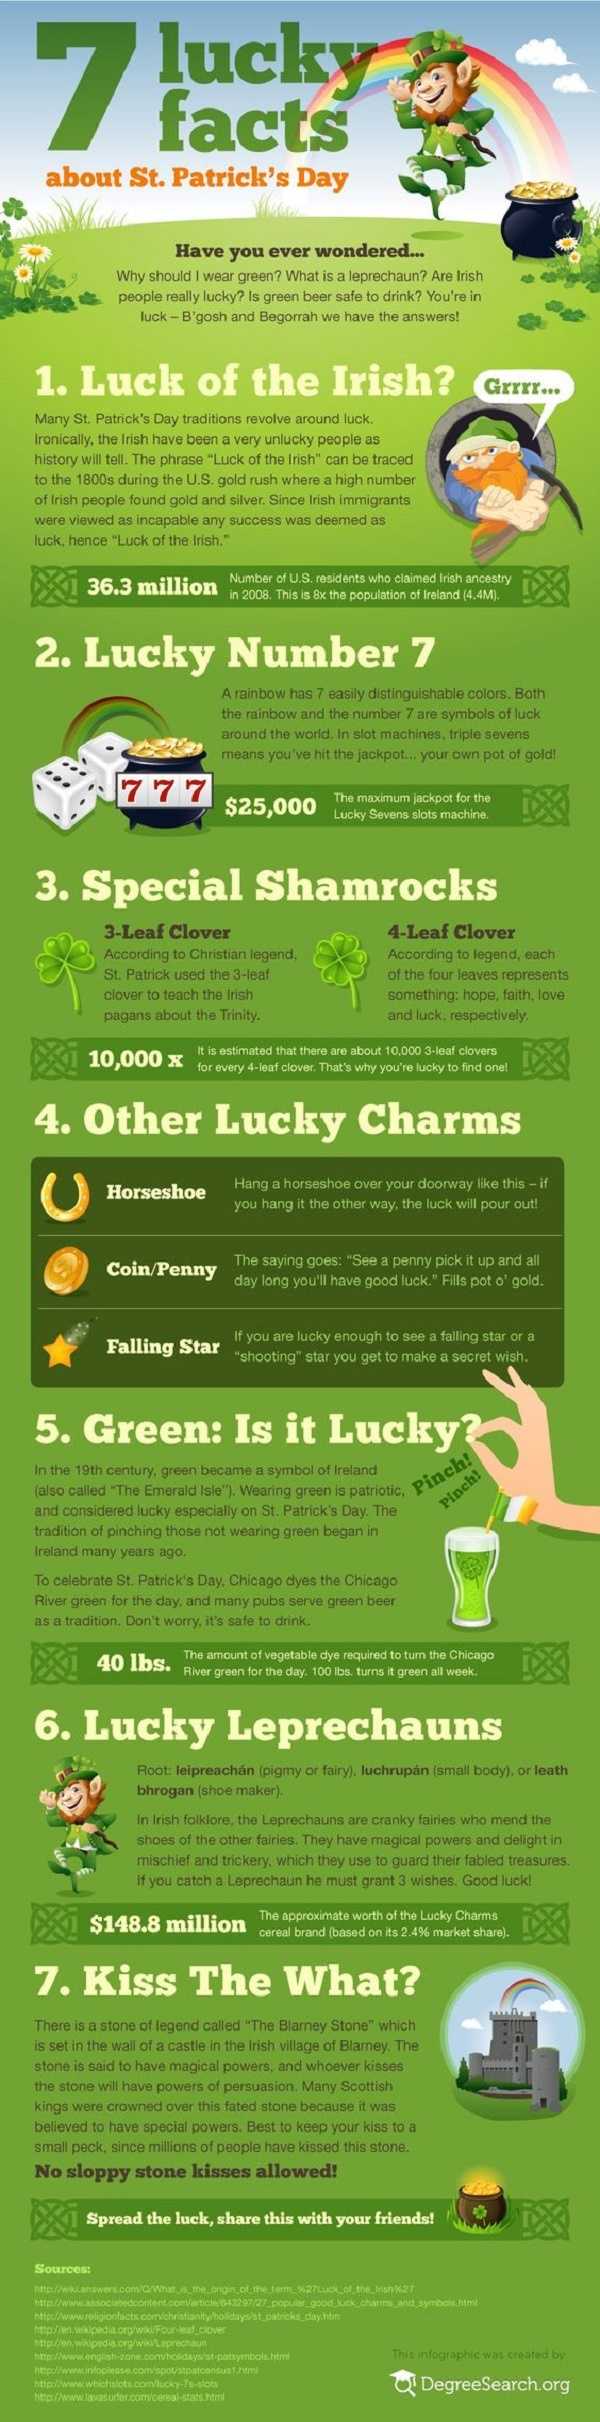 Facts about St. Patricks Day